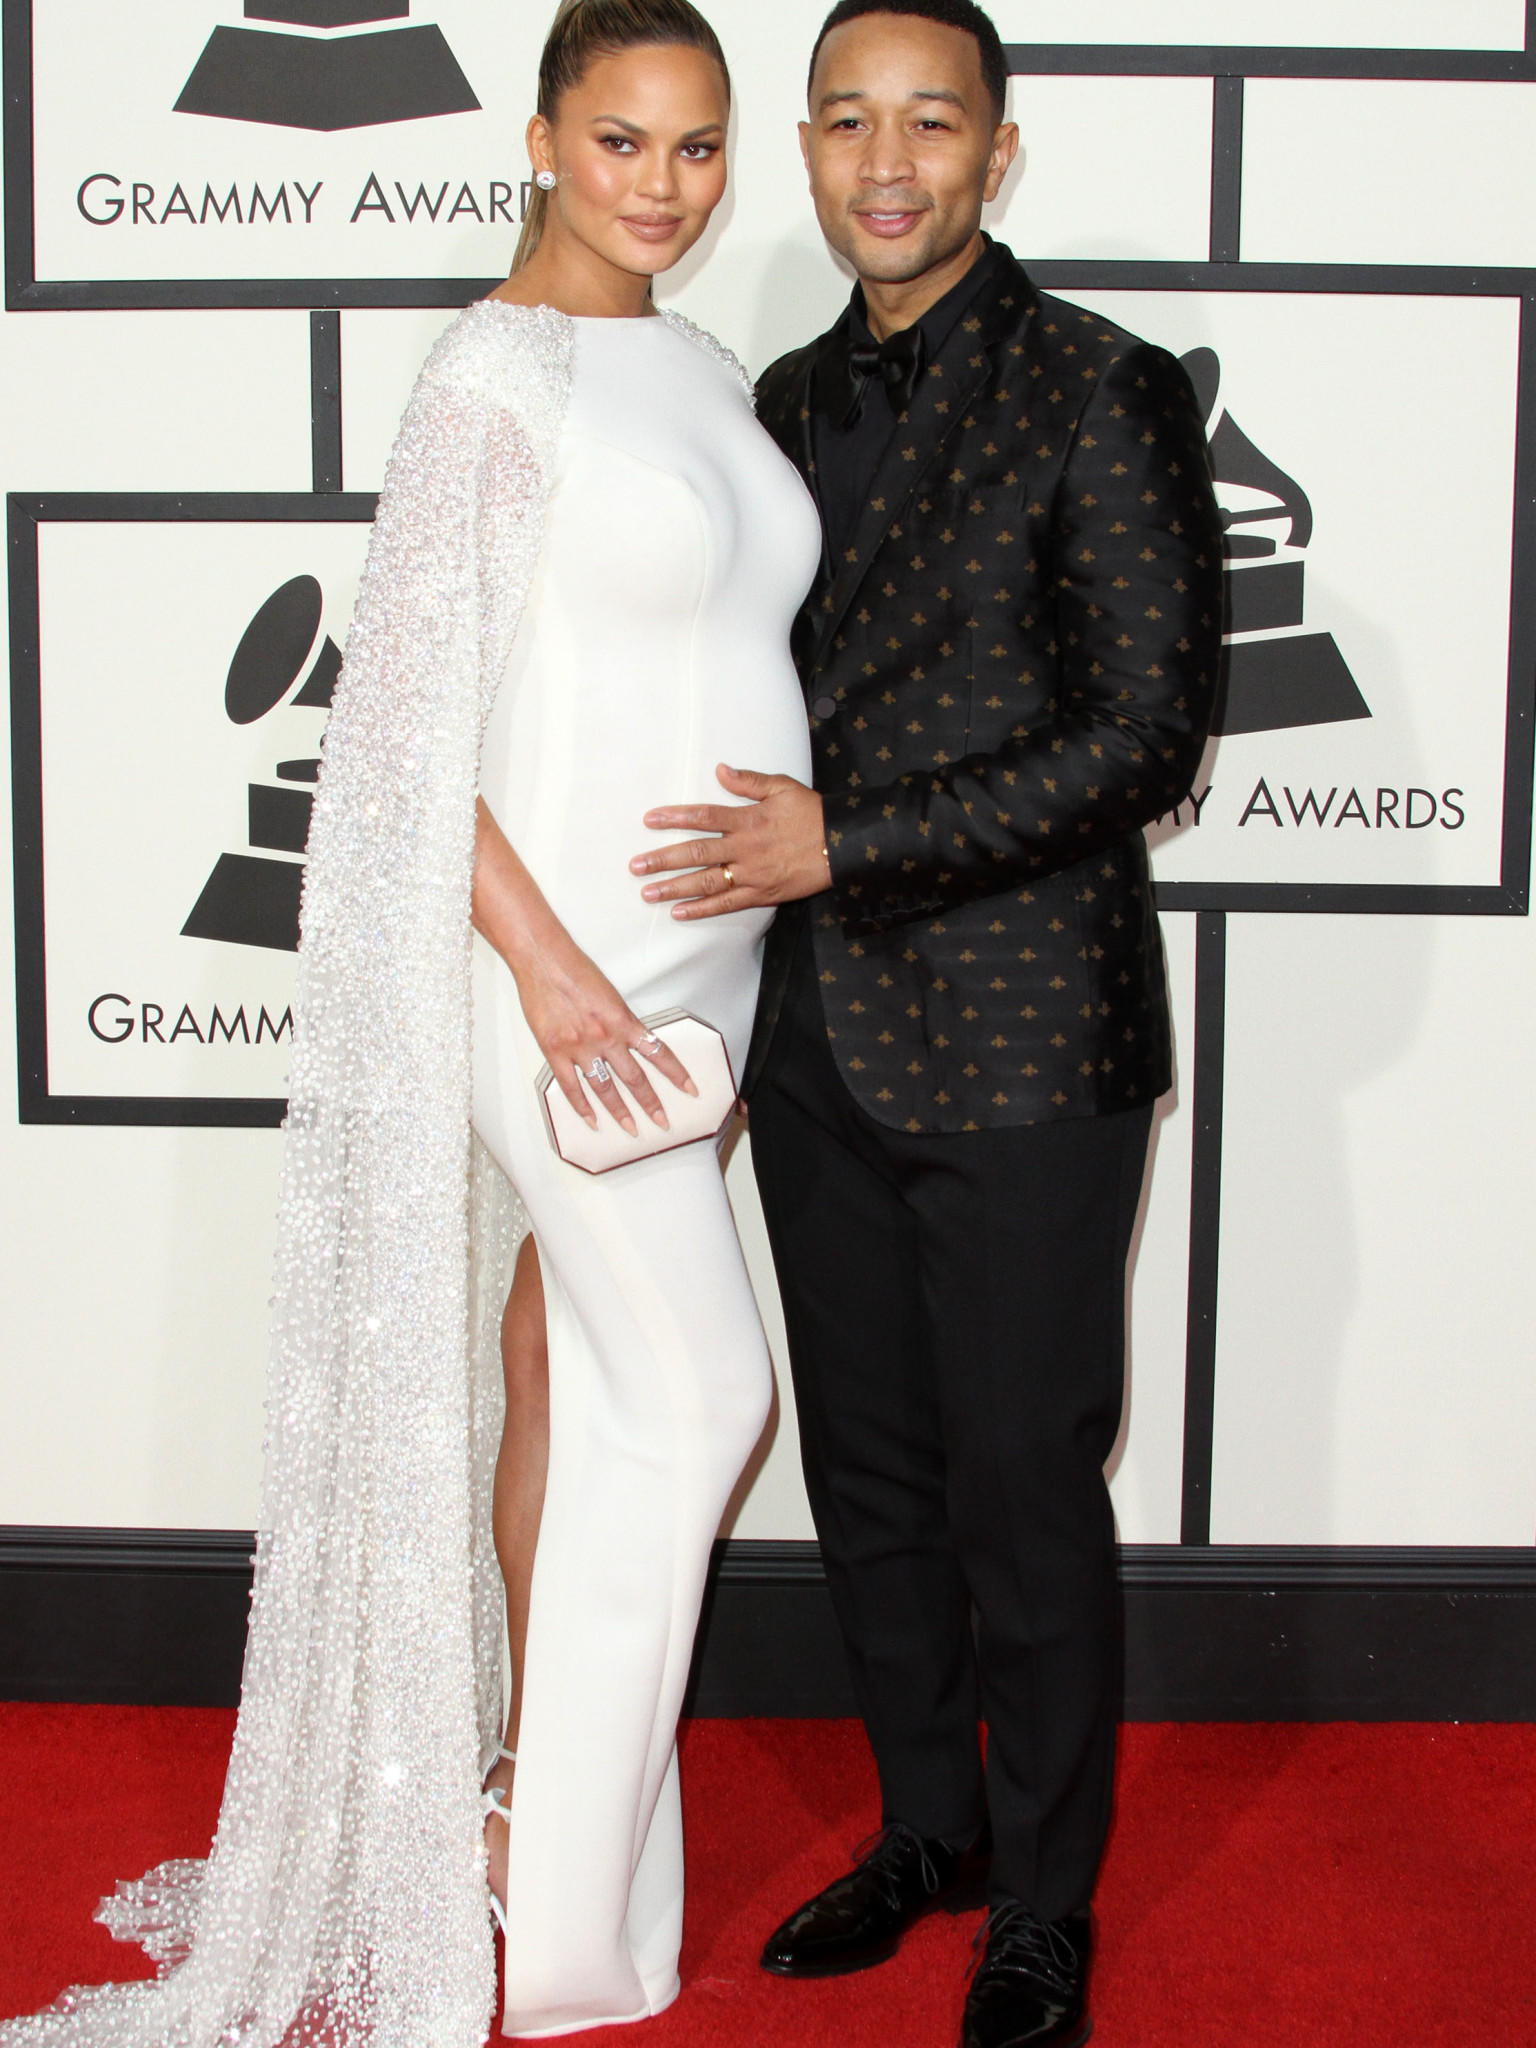 Grammys Looks 2016 Galerie roter Teppich